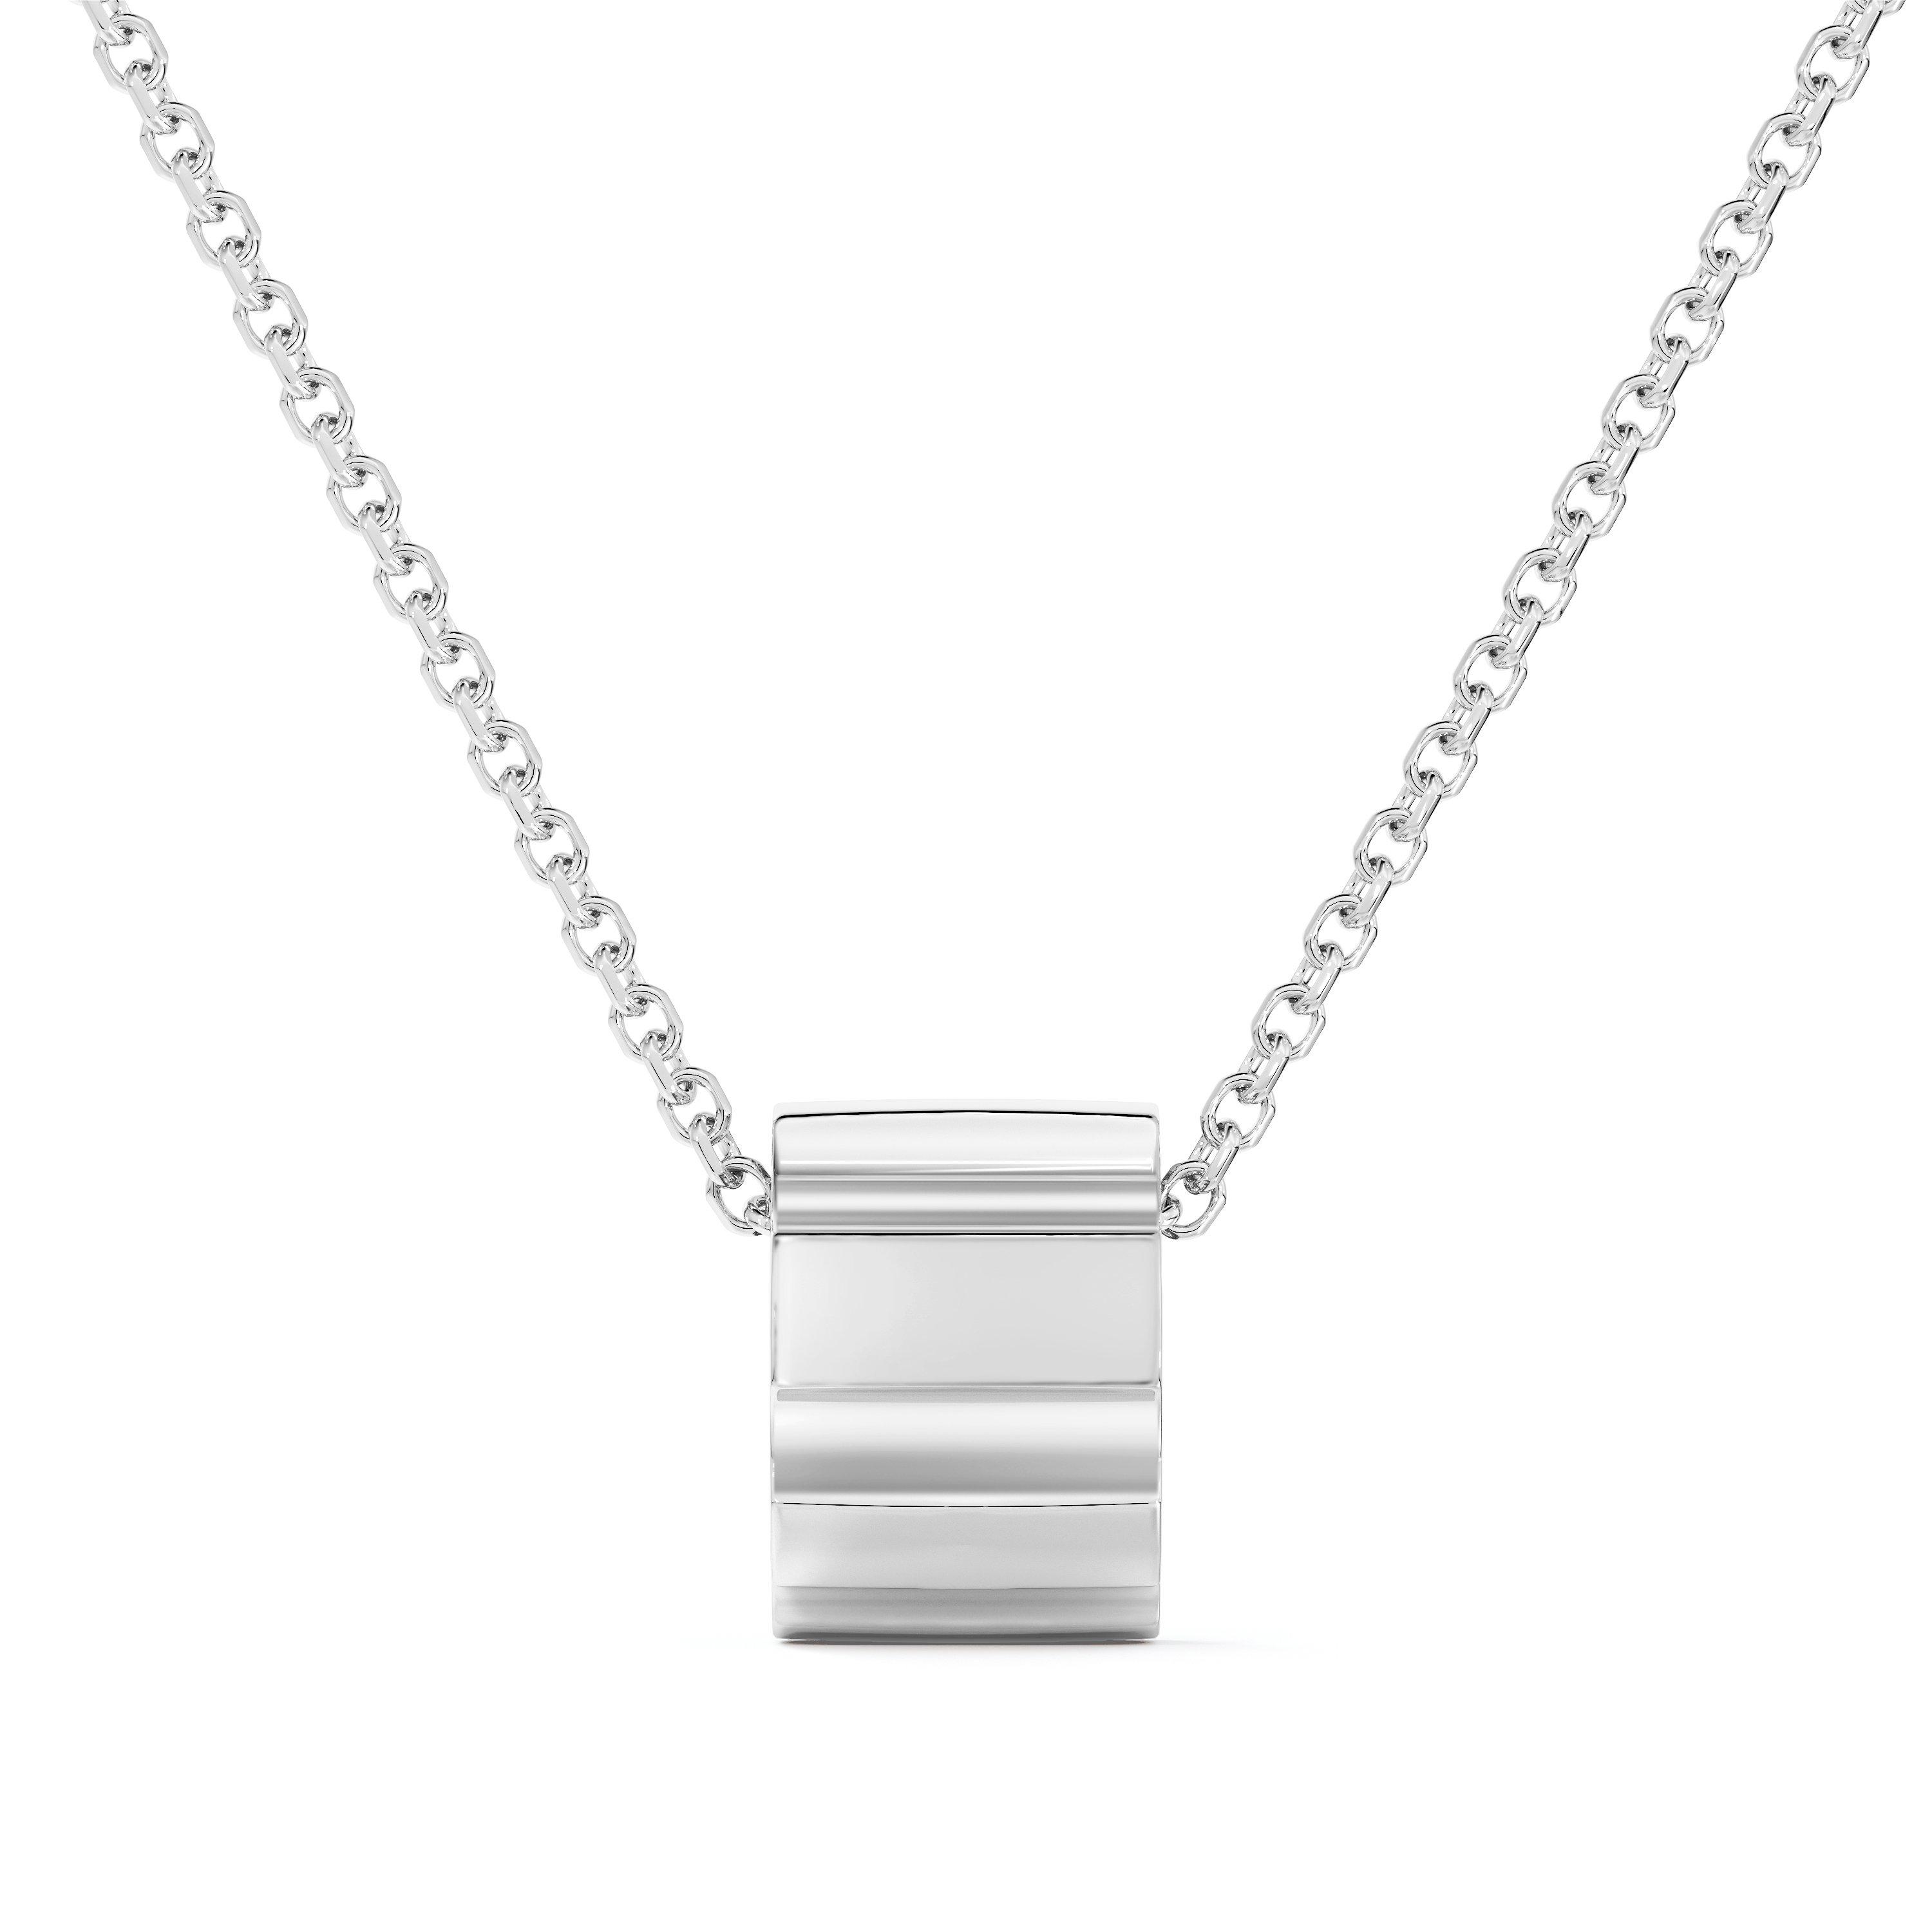 de Beers Forevermark Women's Icon Pavé Pendant Necklace in White Gold